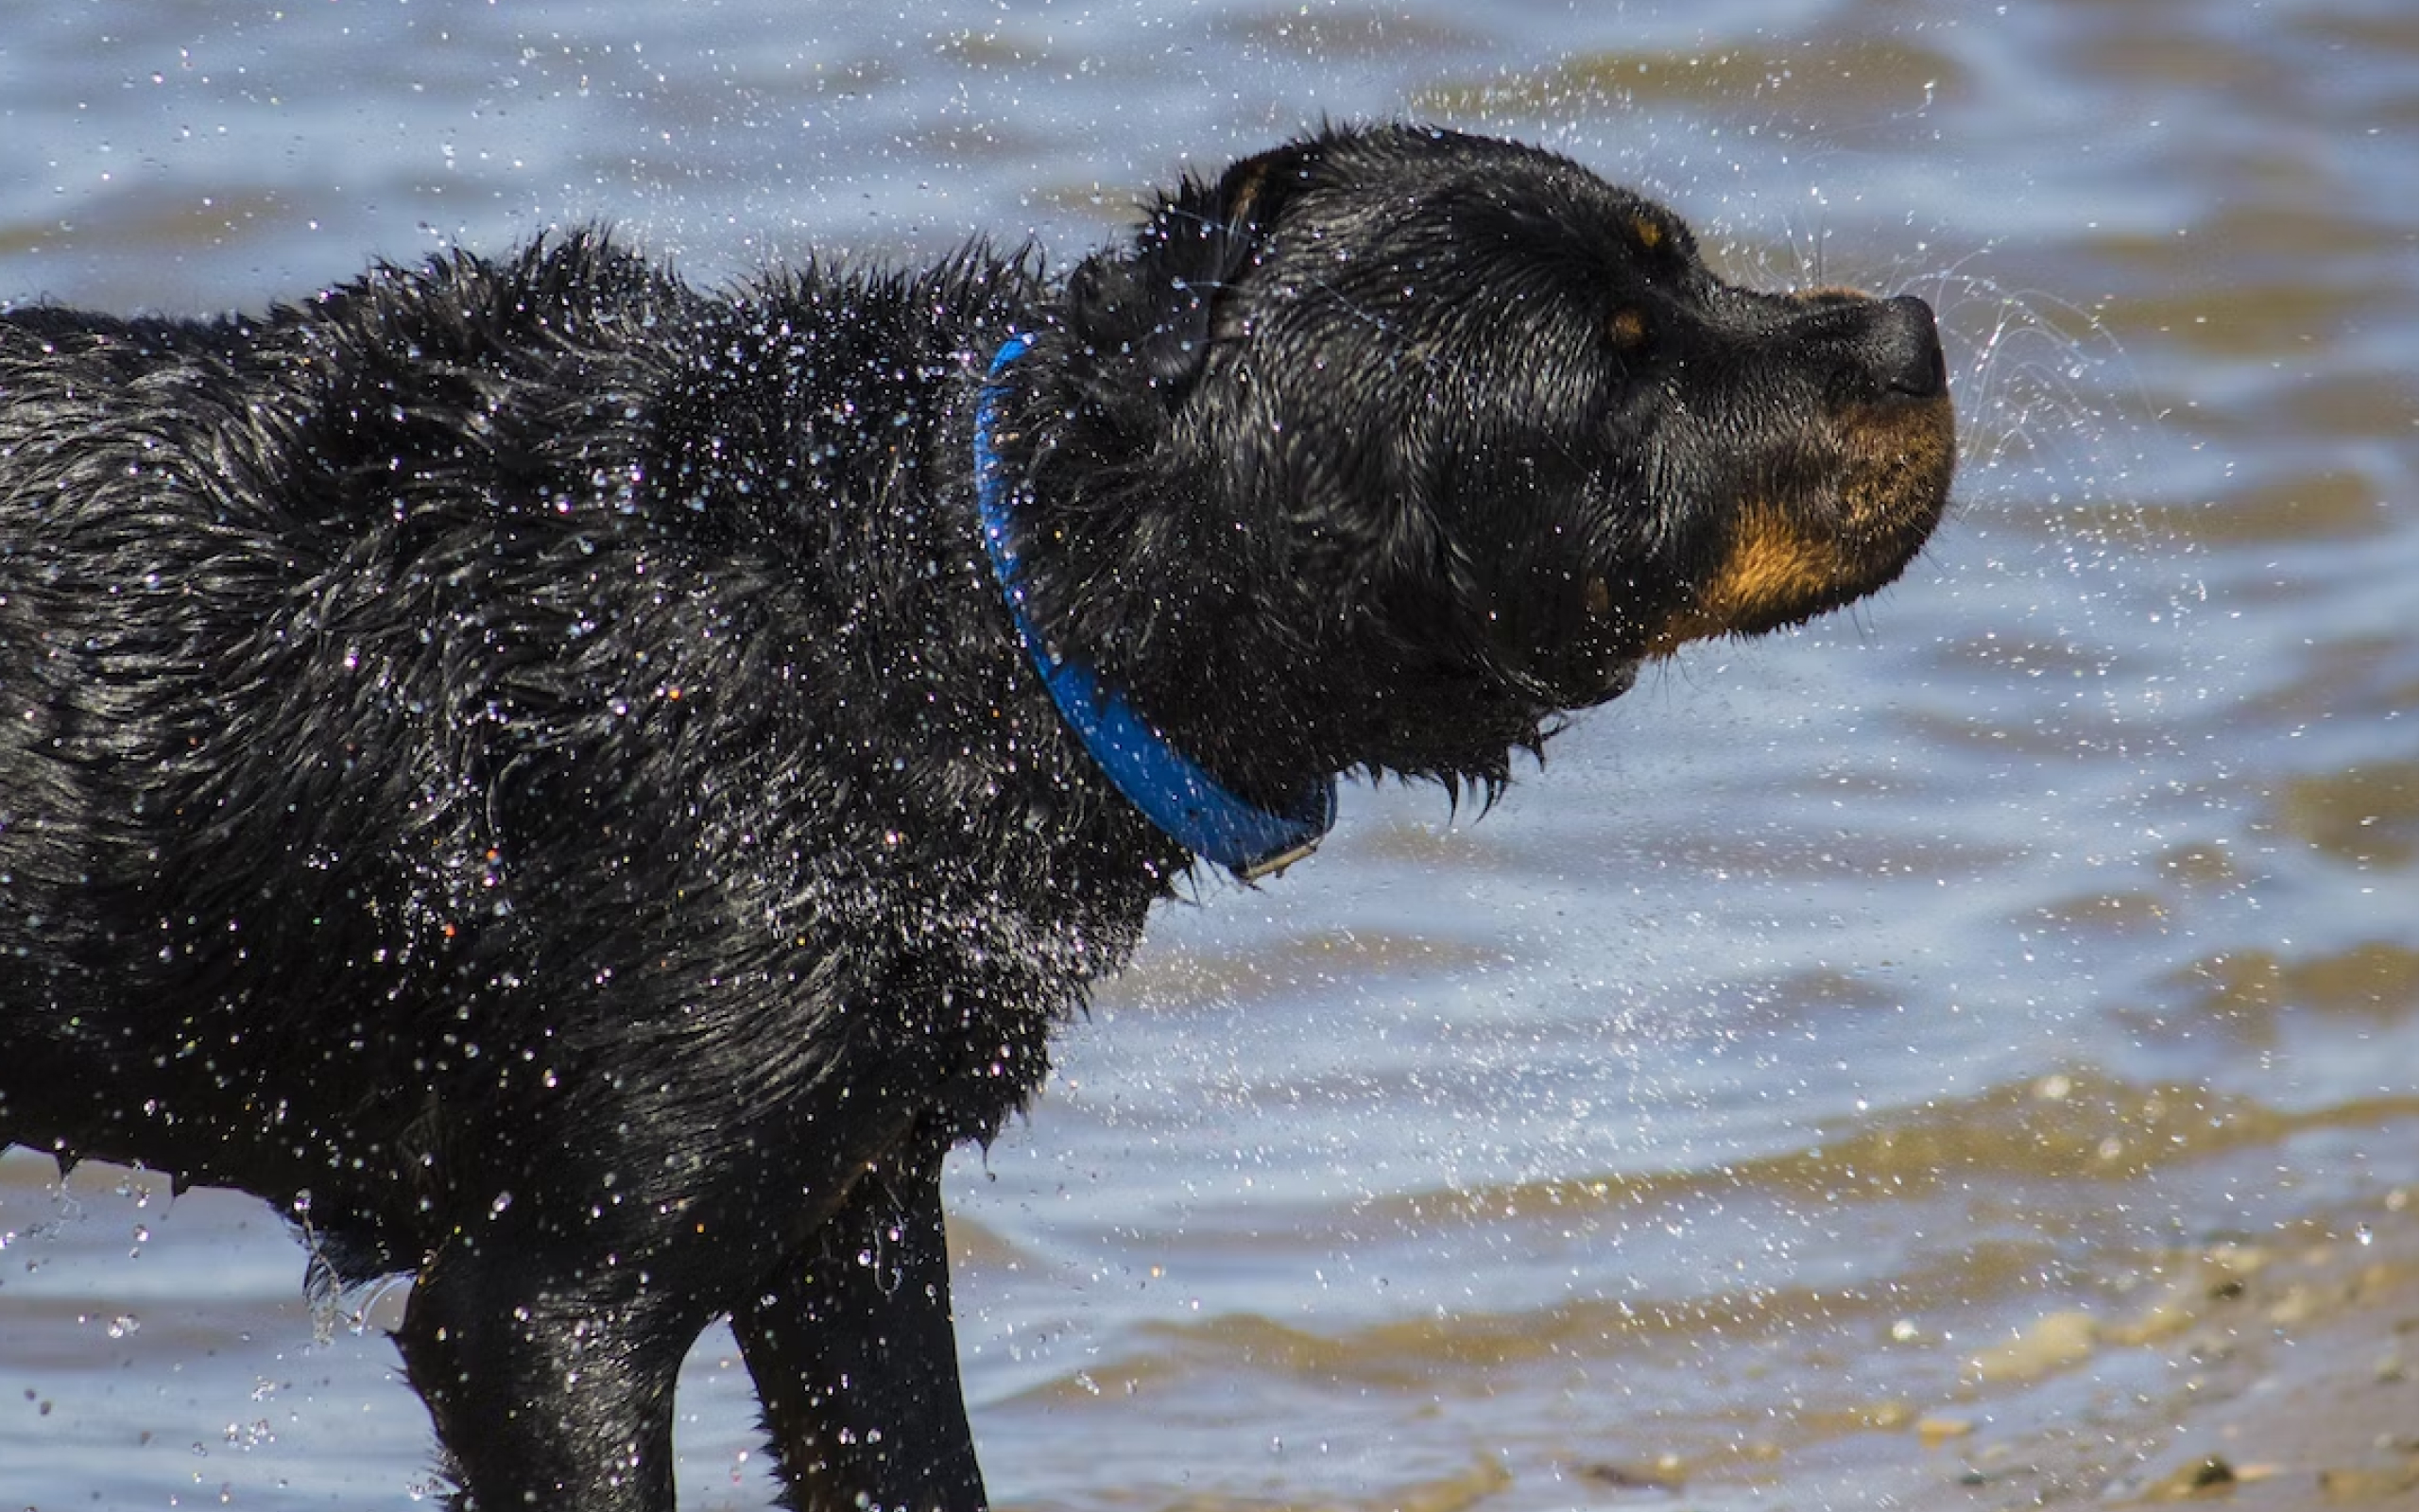 A Rottweiler playing in the water